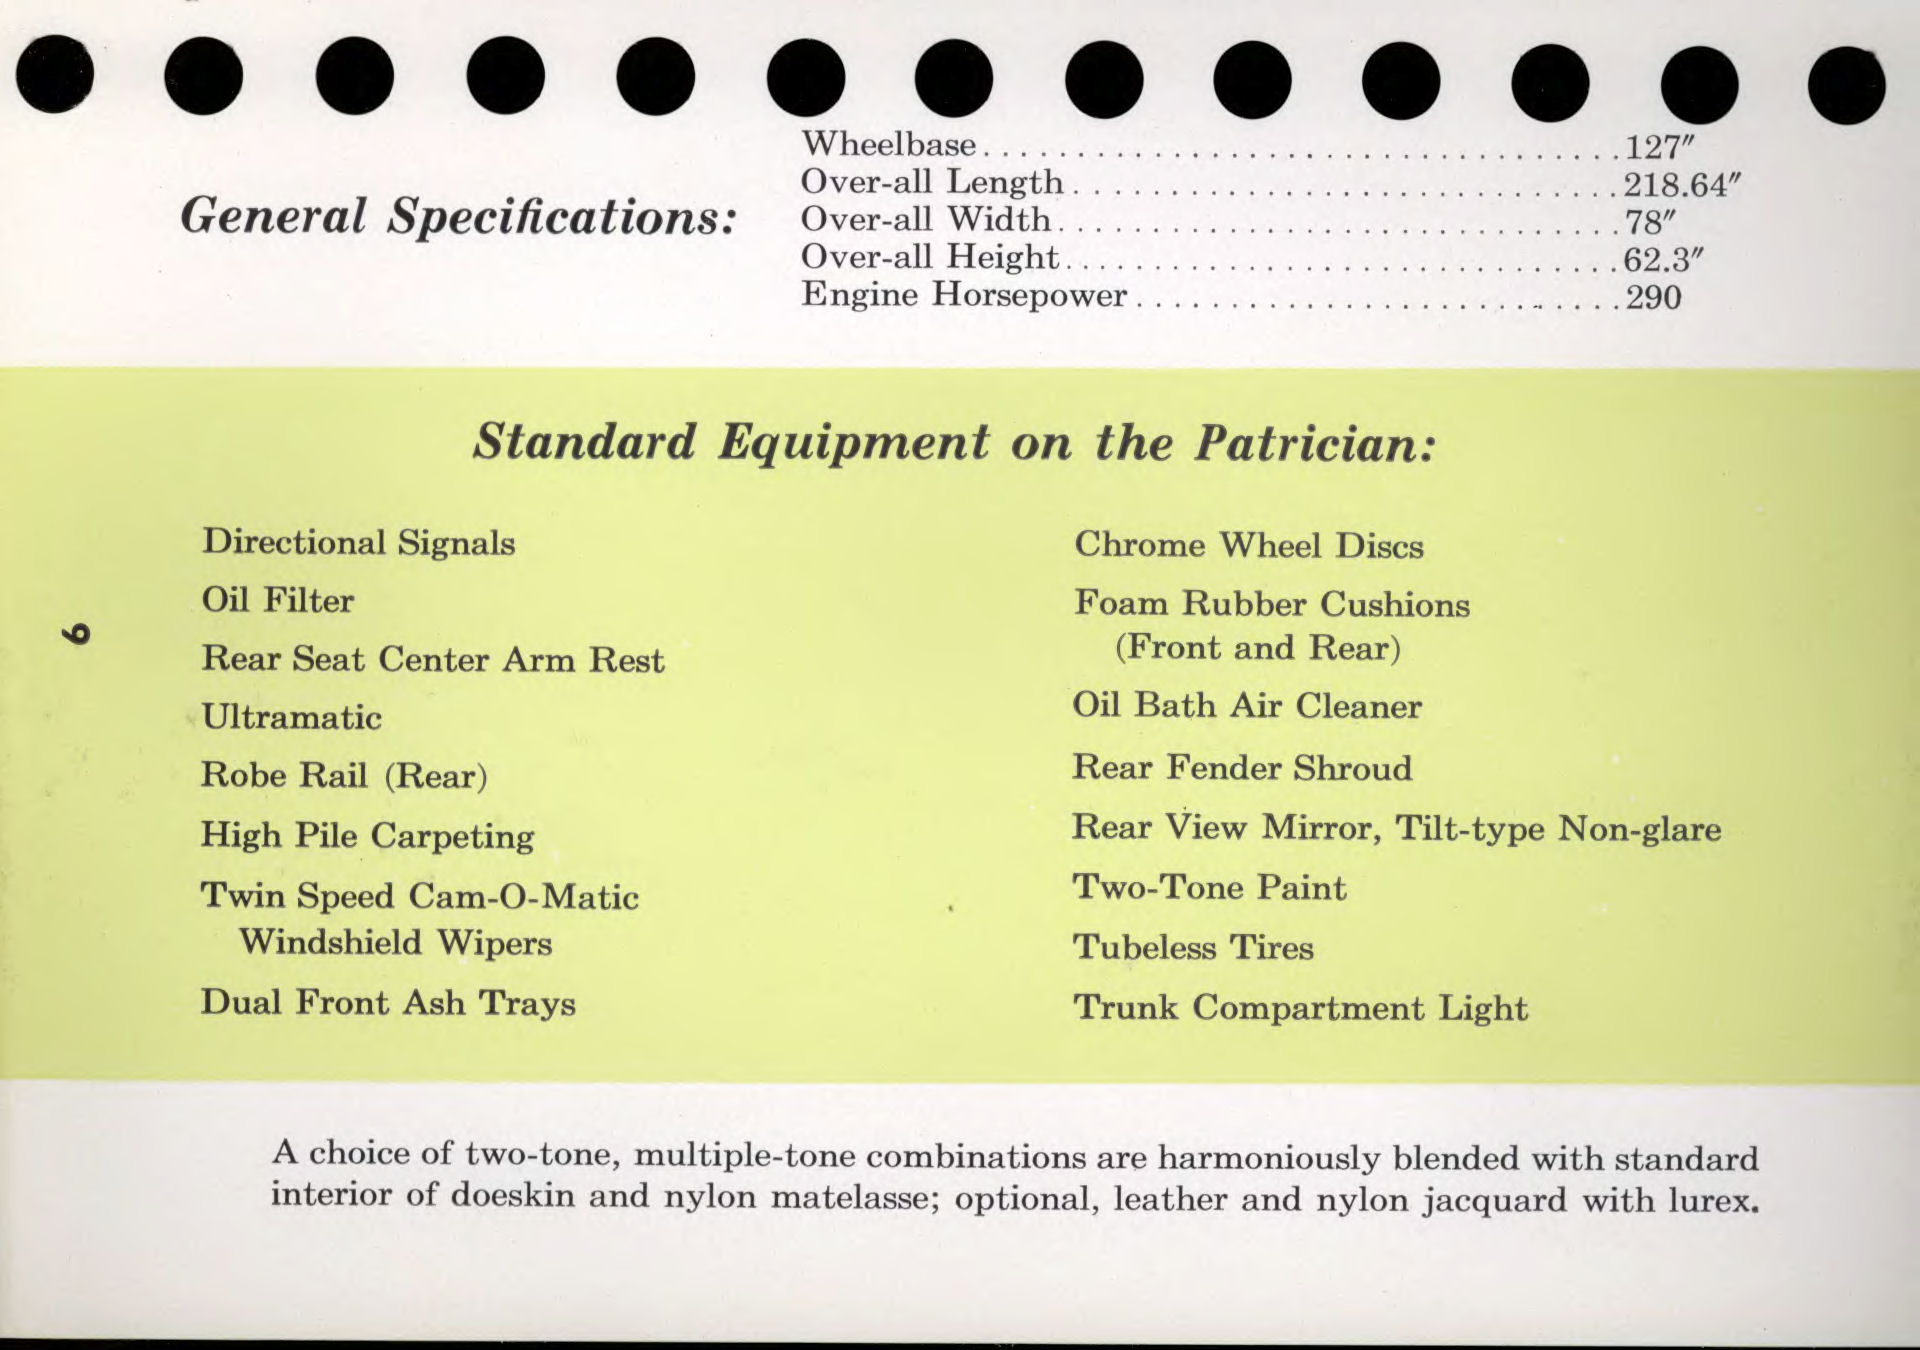 1956 Packard Data Book Page 8